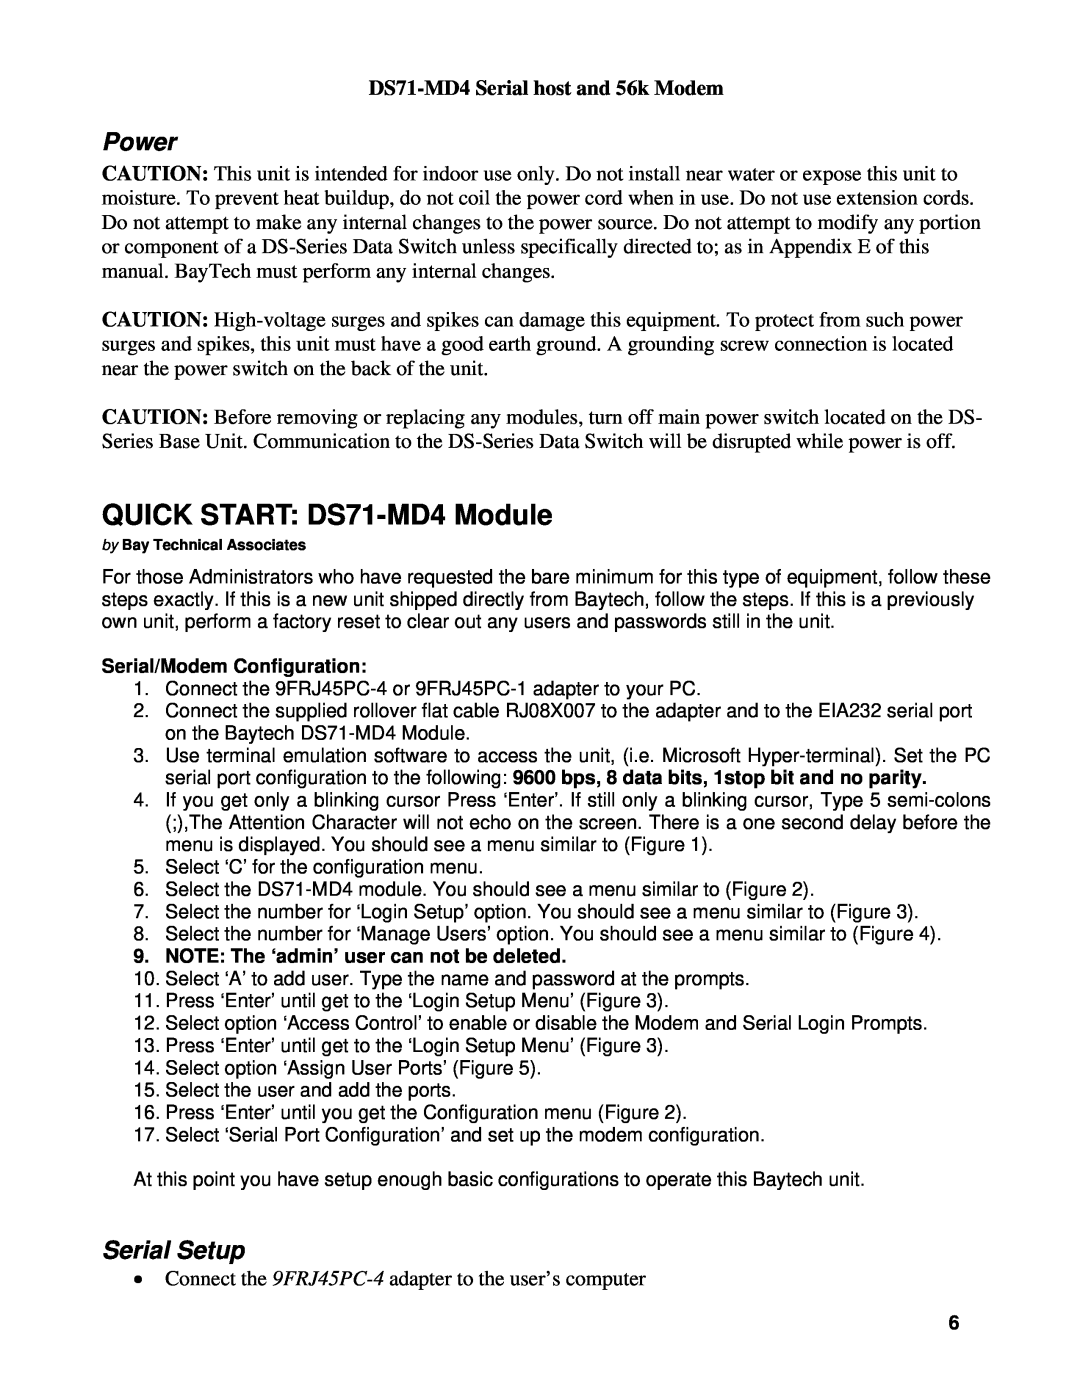 Cisco Systems DS Series manual QUICK START DS71-MD4 Module, Power, Serial Setup, DS71-MD4 Serial host and 56k Modem 